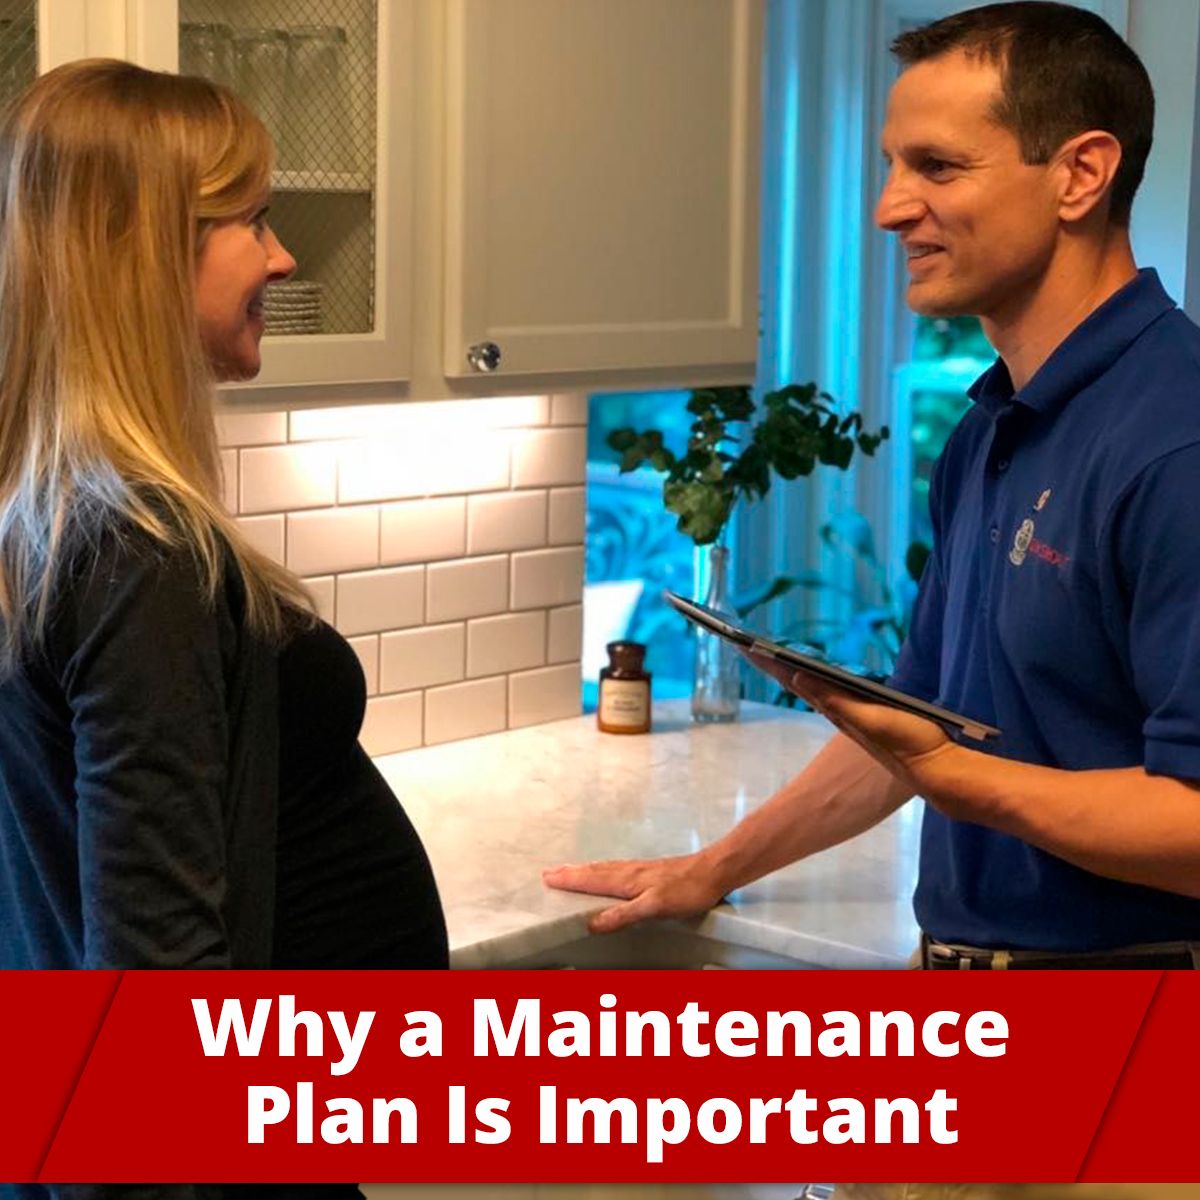 Why a Maintenance Plan is Important